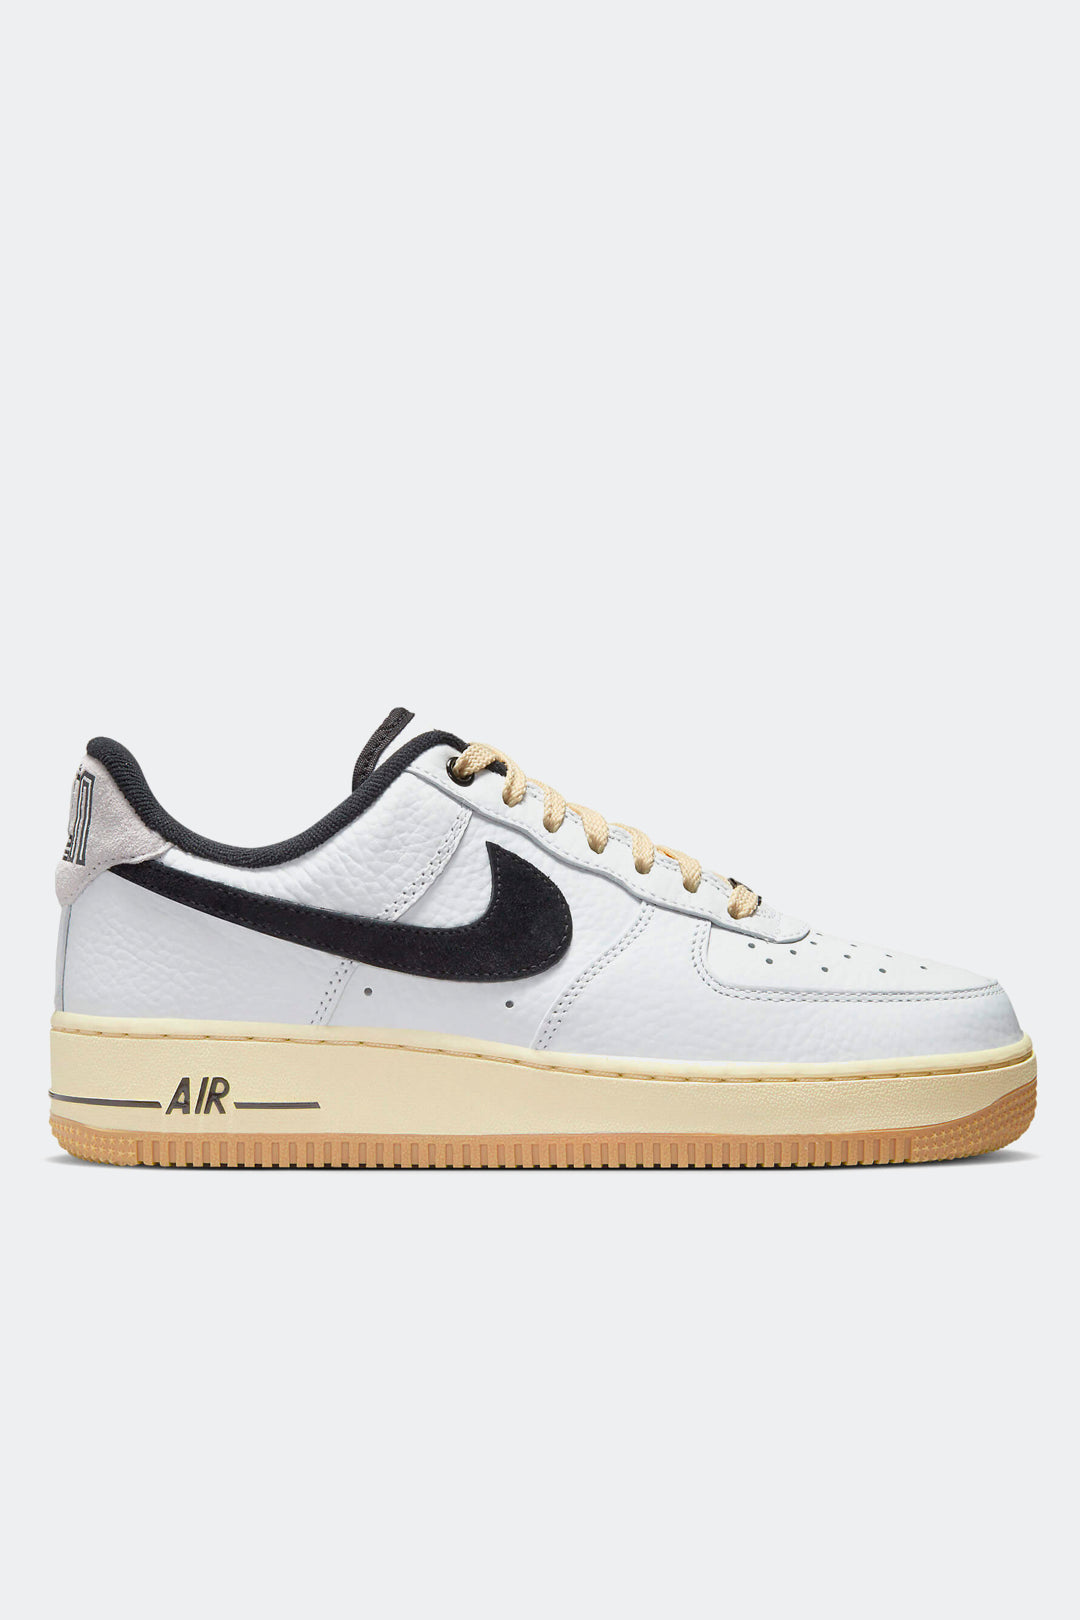 NIKE AIR FORCE 1 '07 LX "COMMAND FORCE" - MUJER - HYPE